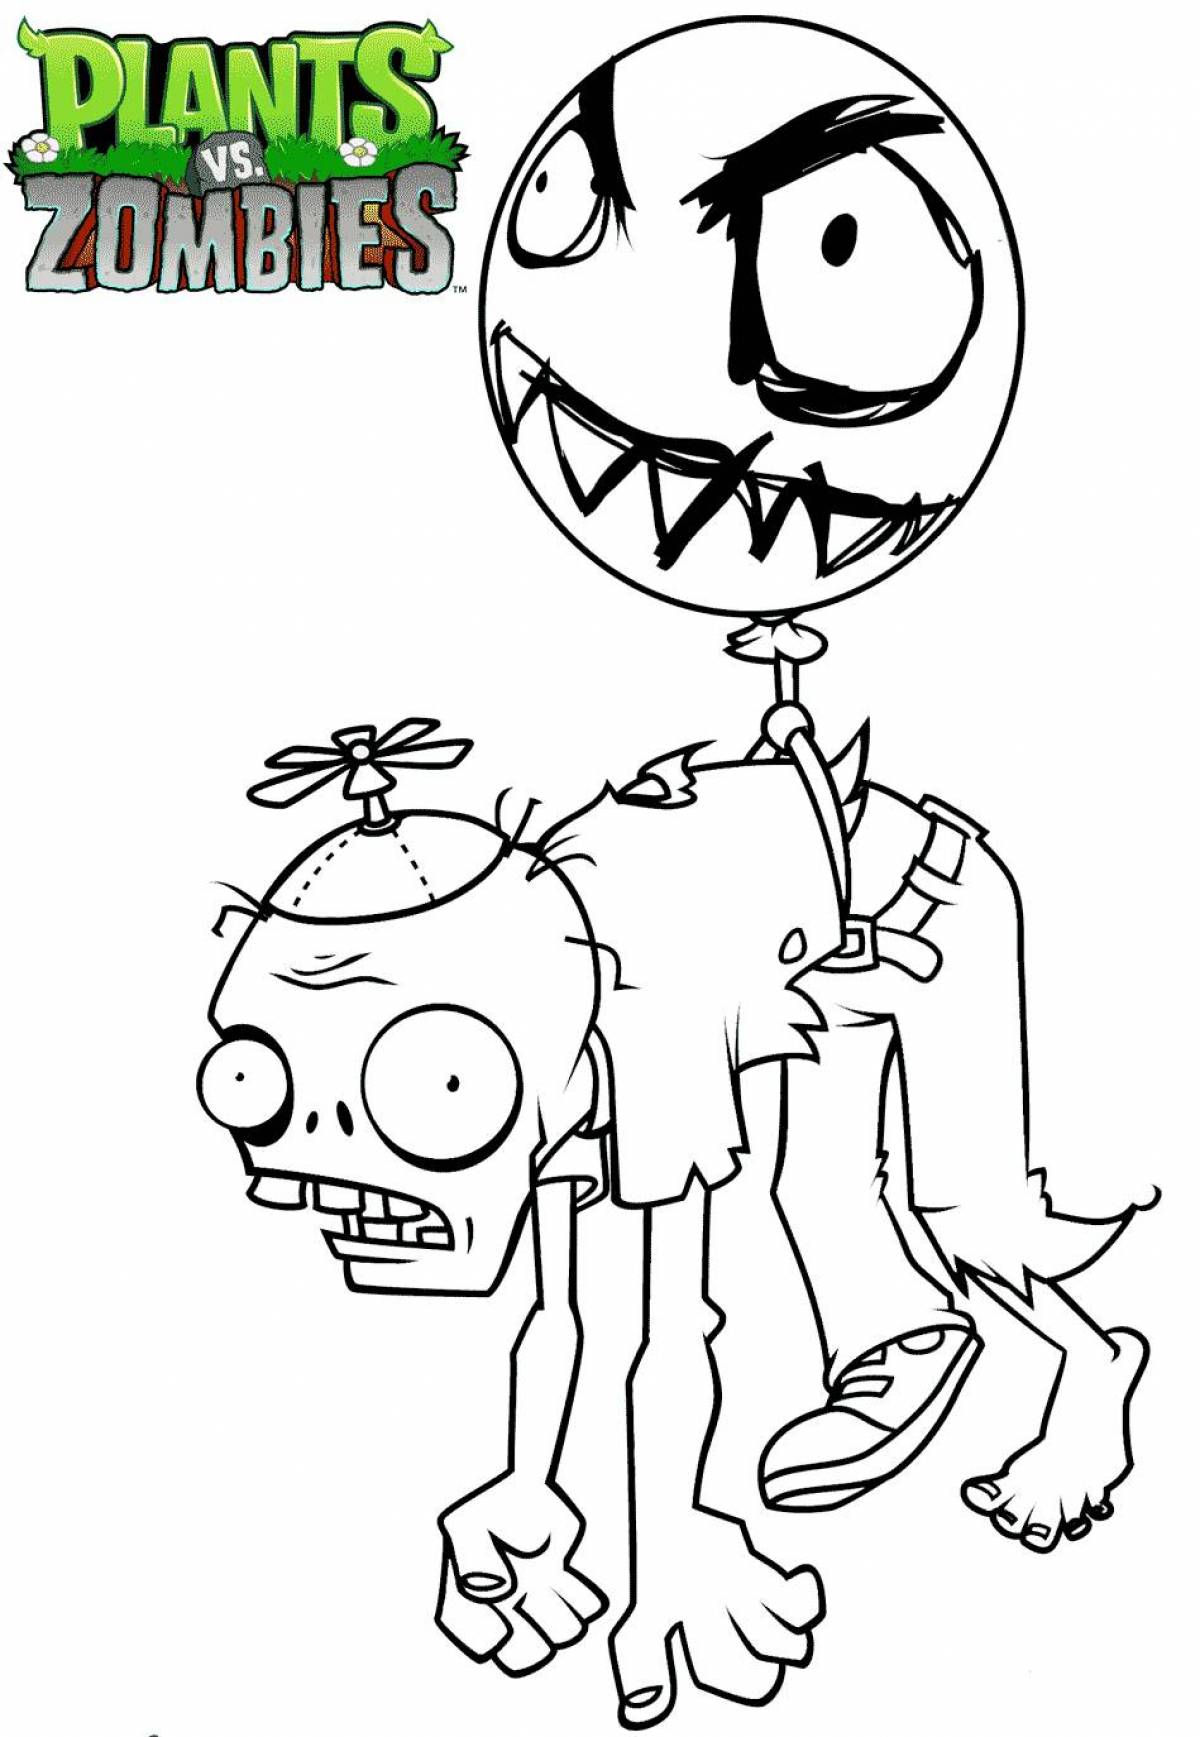 Terrible zombie coloring page